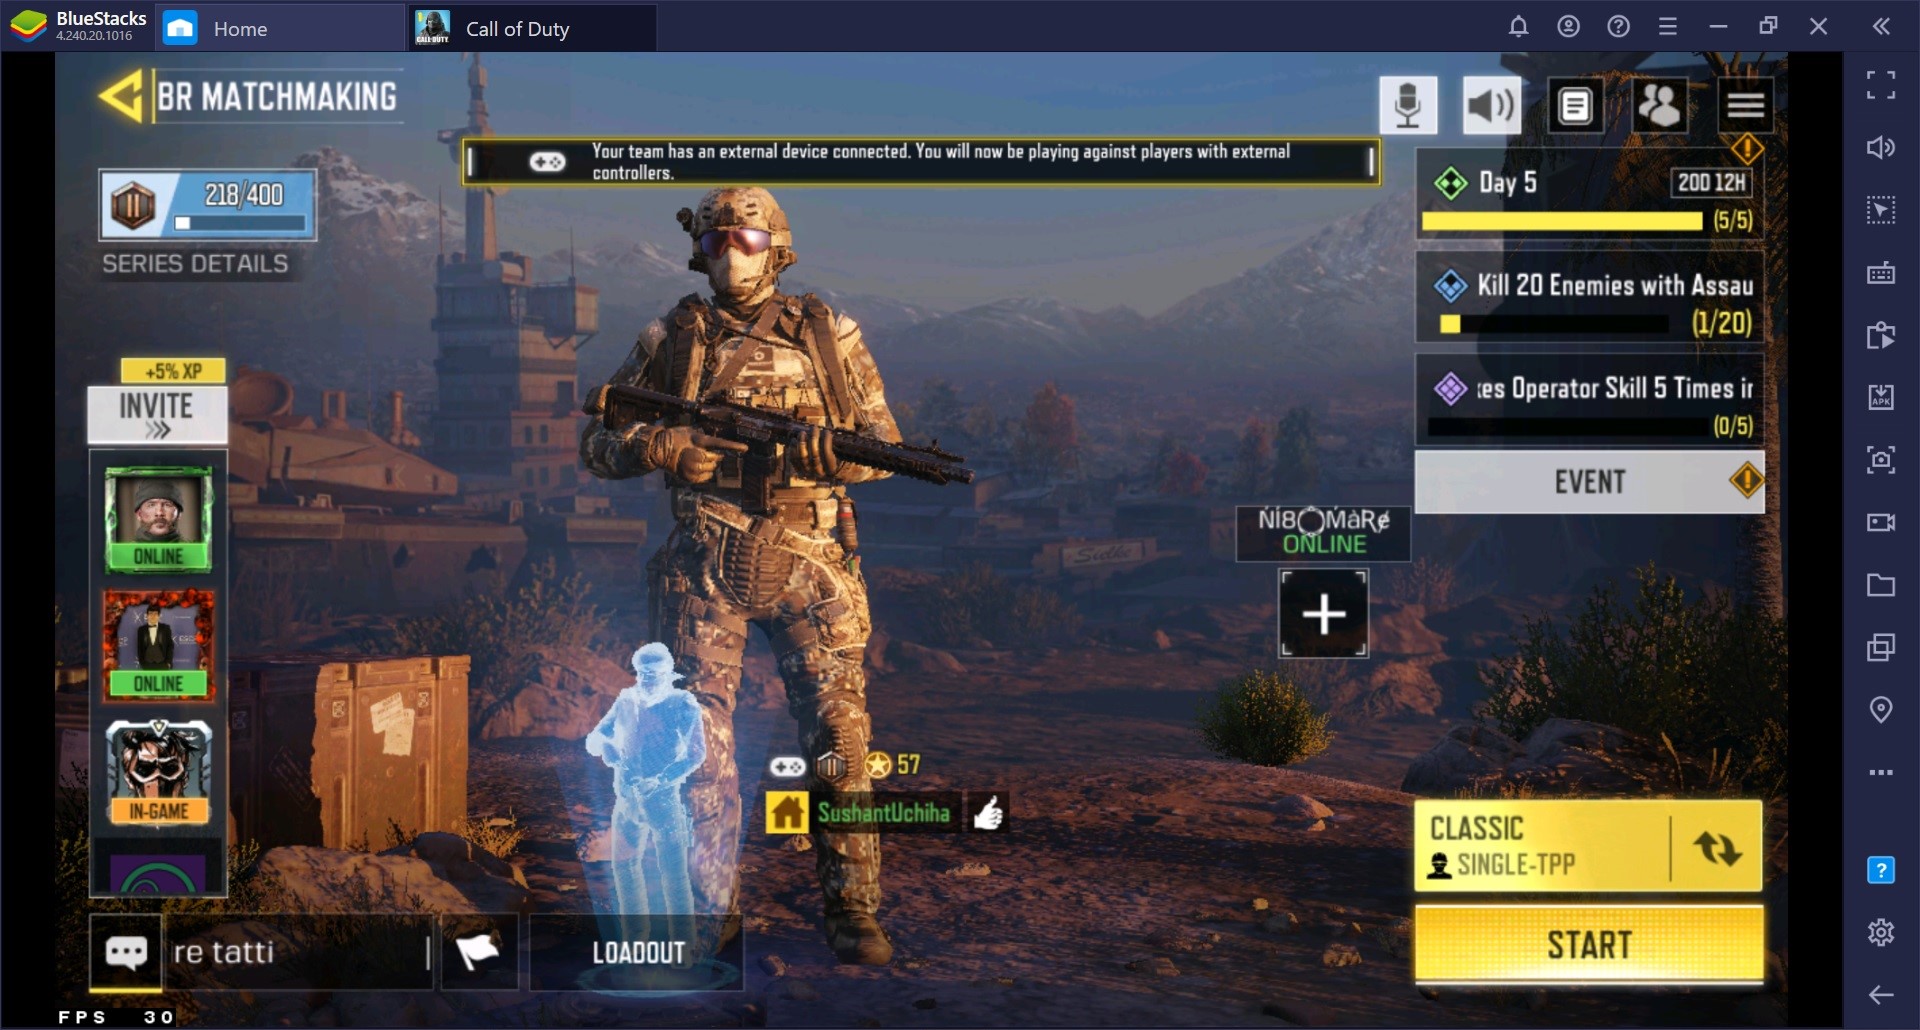 Call of Duty Mobile cheats, tips - Battle royale tips for victory